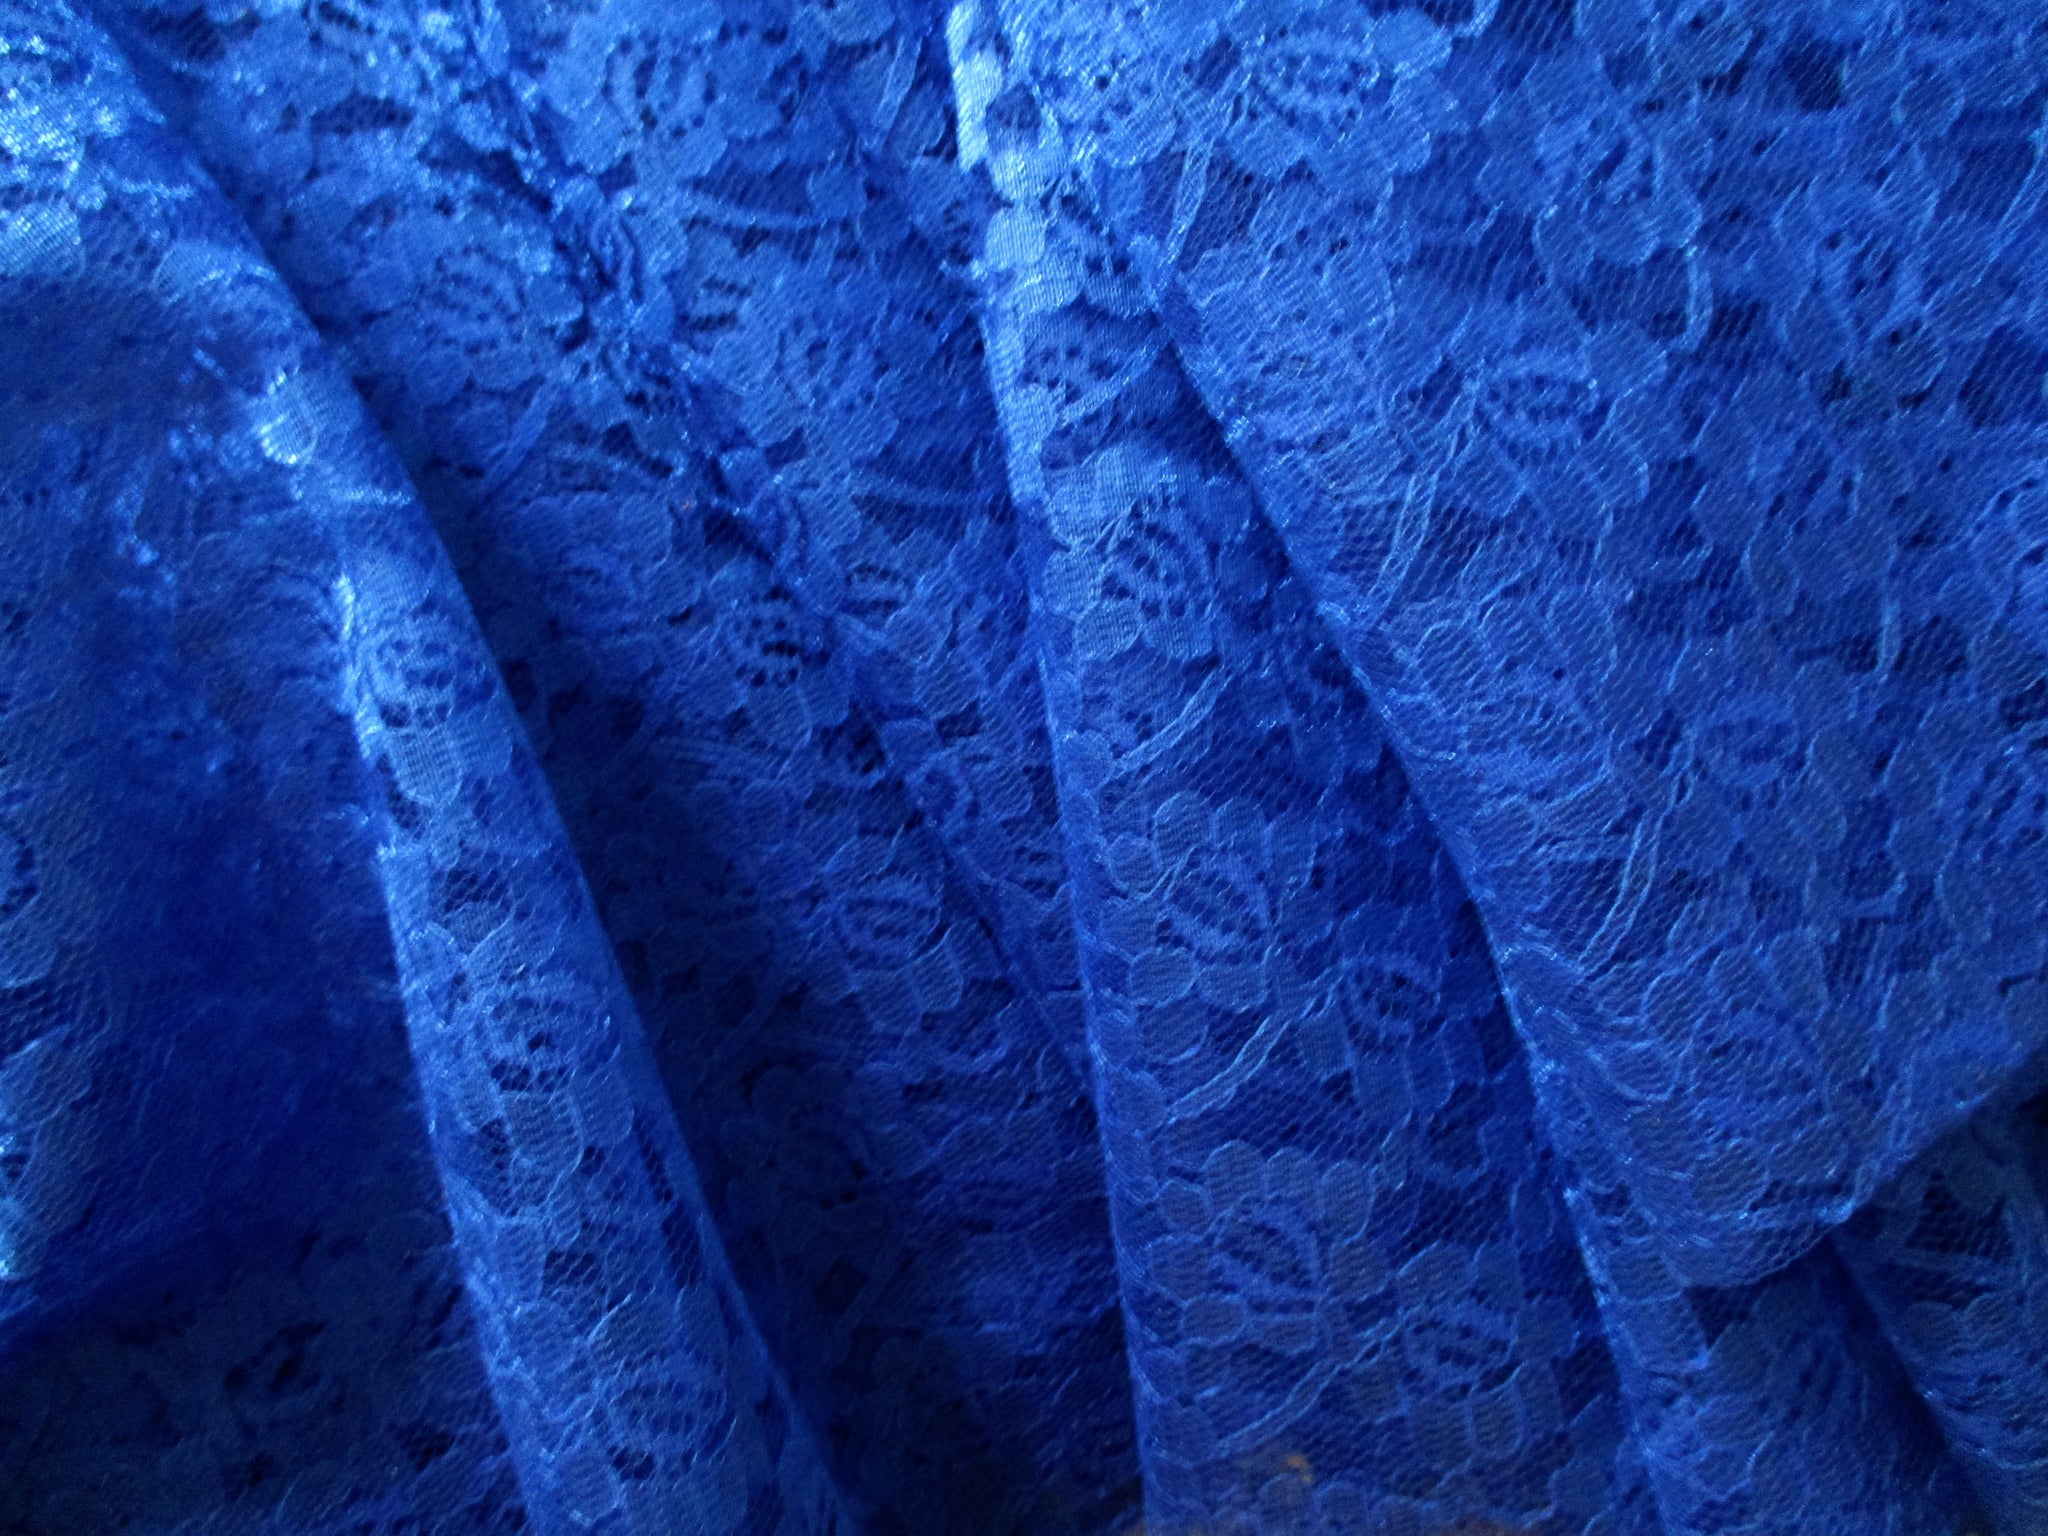 Lace Fabric in Royal Blue Floral Design: Sold by the yard, 45